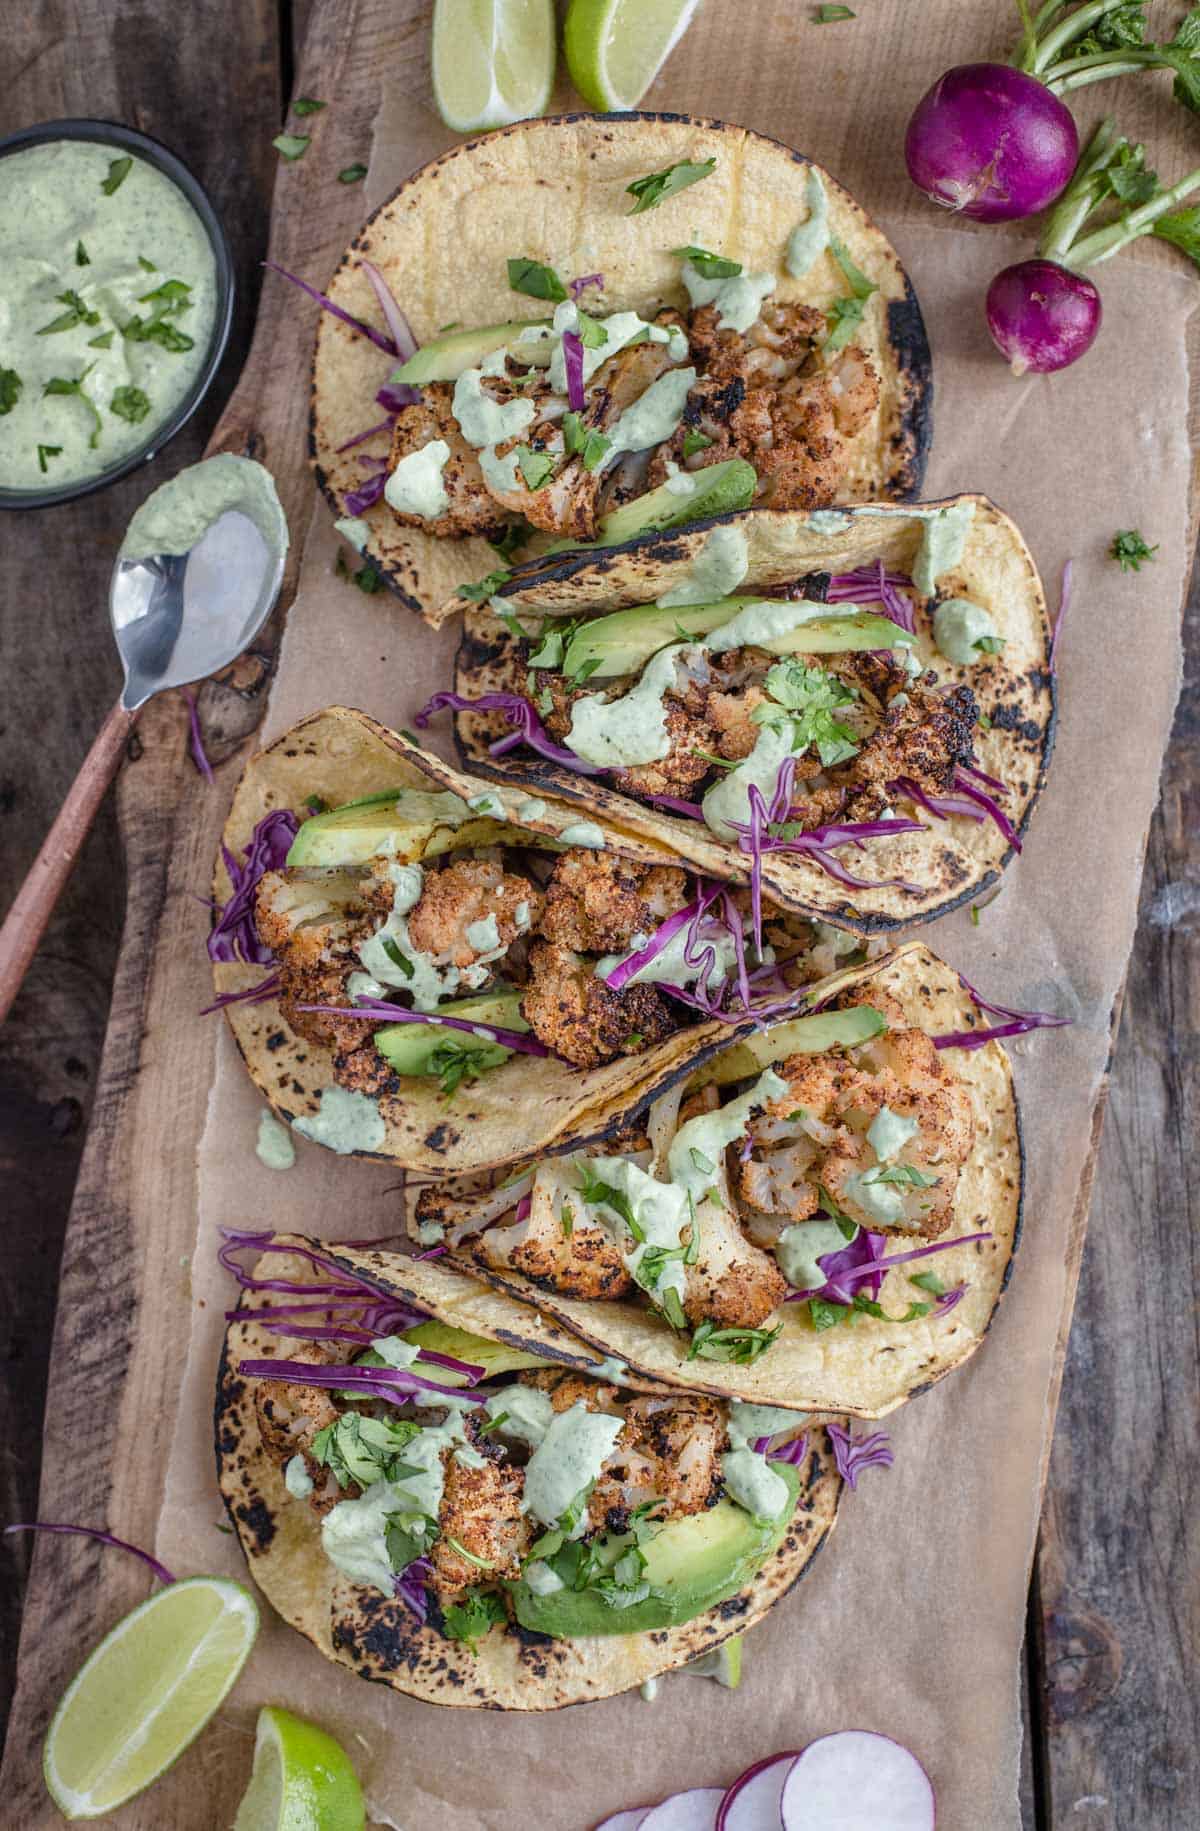 Cauliflower tacos on a wood board topped with taco toppings